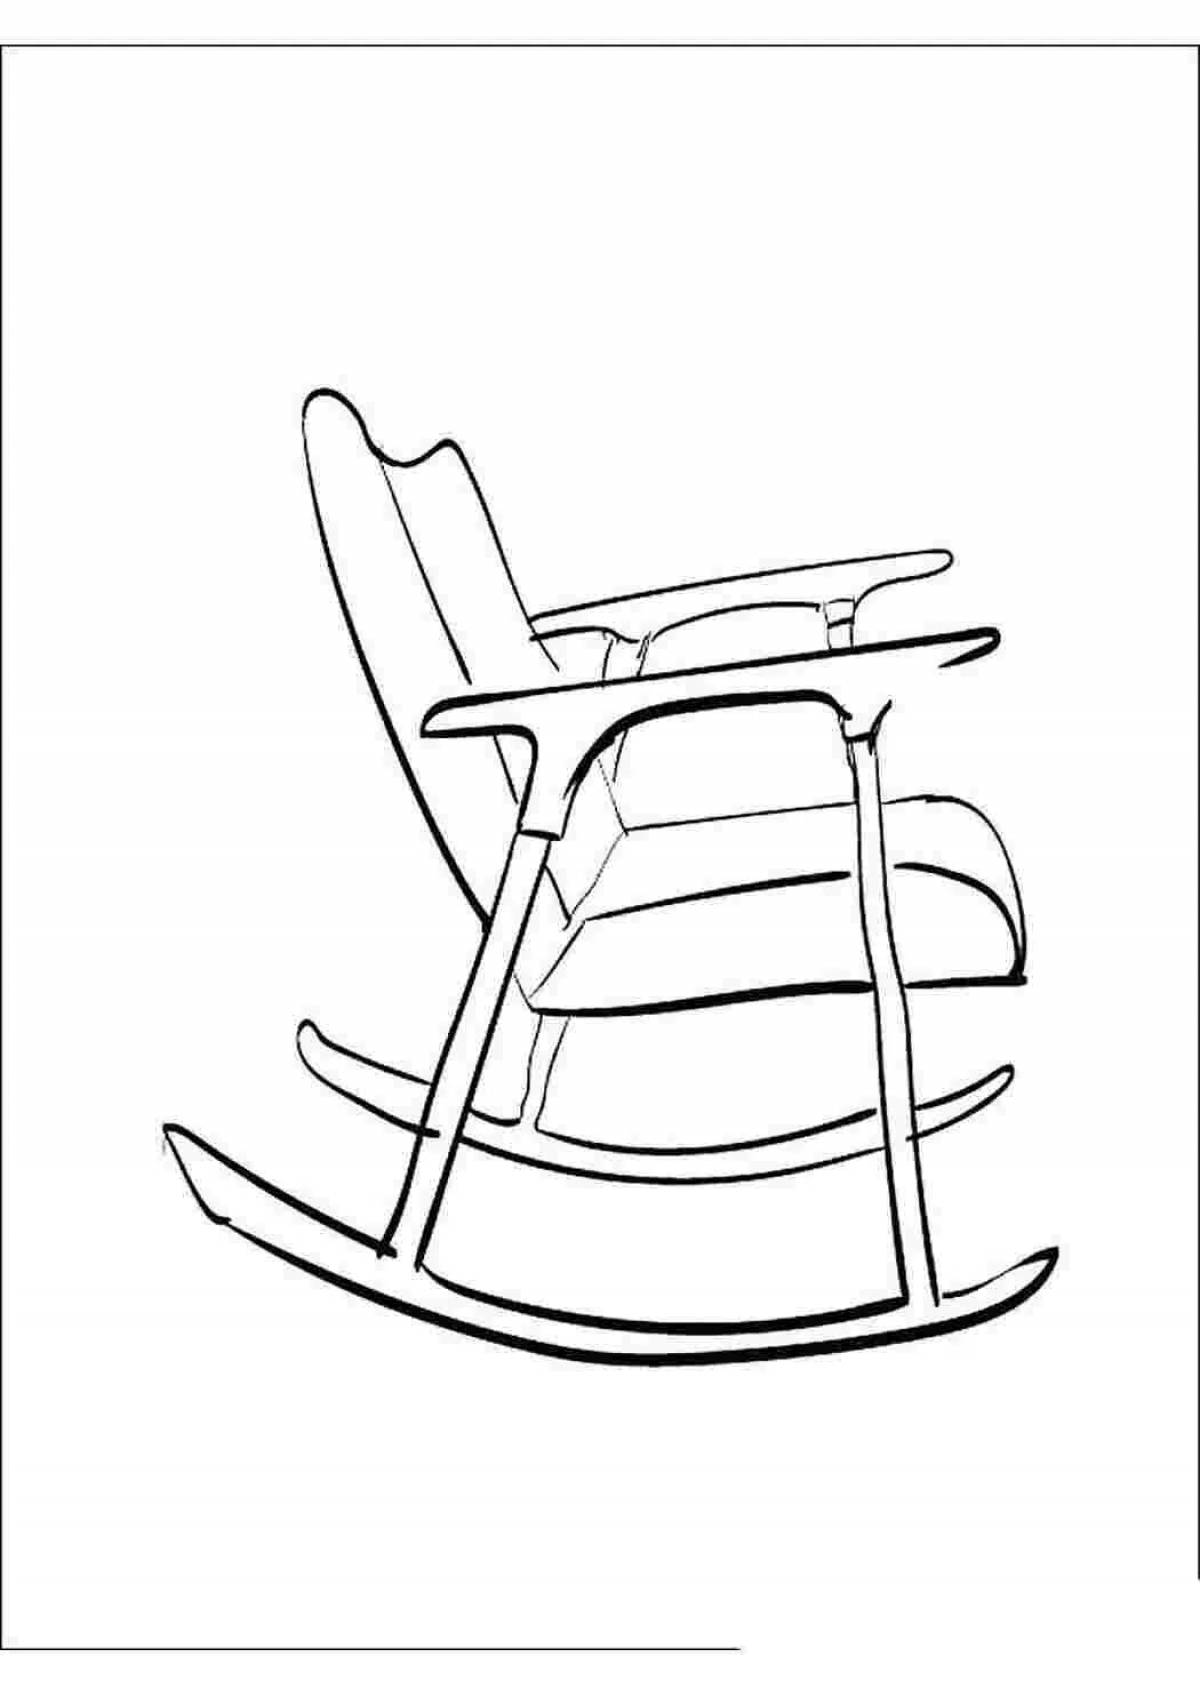 Awesome chair coloring book for 4-5 year olds